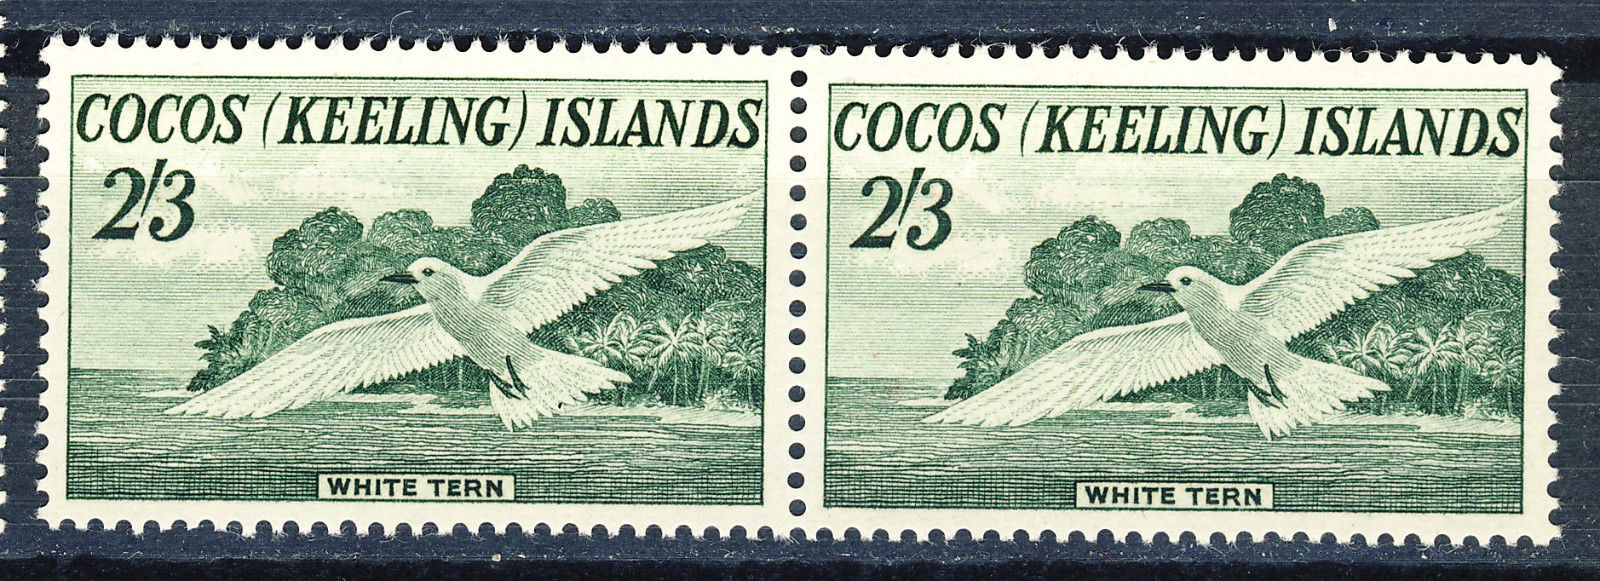 1963 Cocos Keeling Islands 2/3 shilling High value from first set MNH PAIR Sc.#6